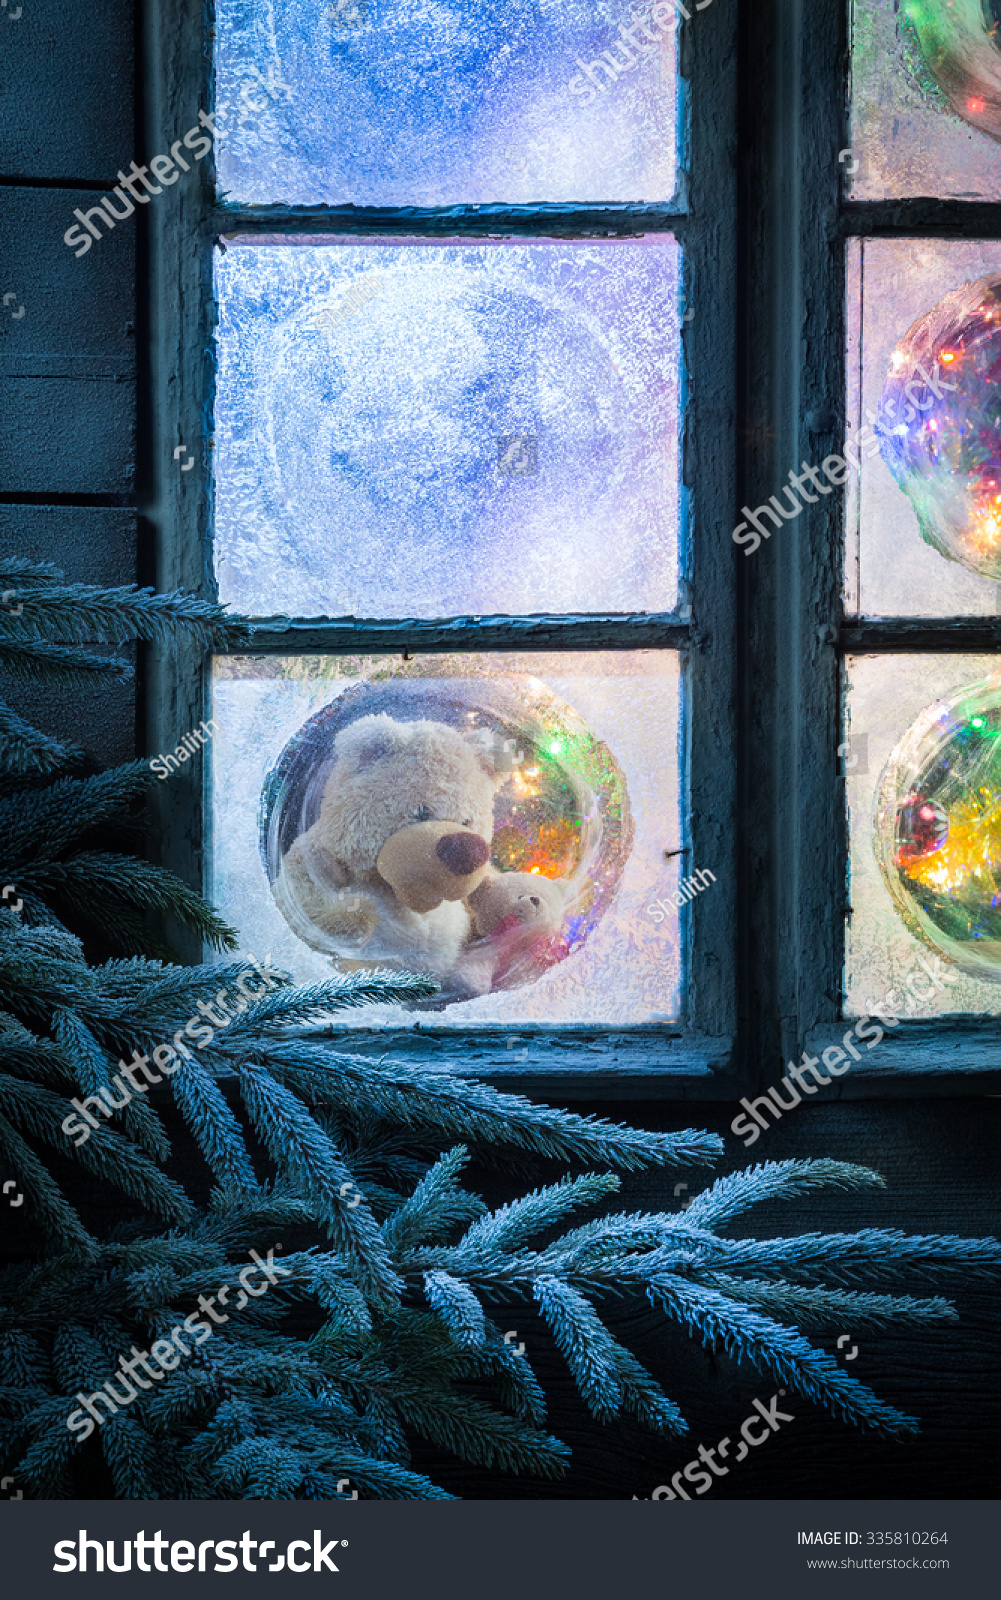 Teddy bear in frozen window for Christmas with tree and lights #335810264